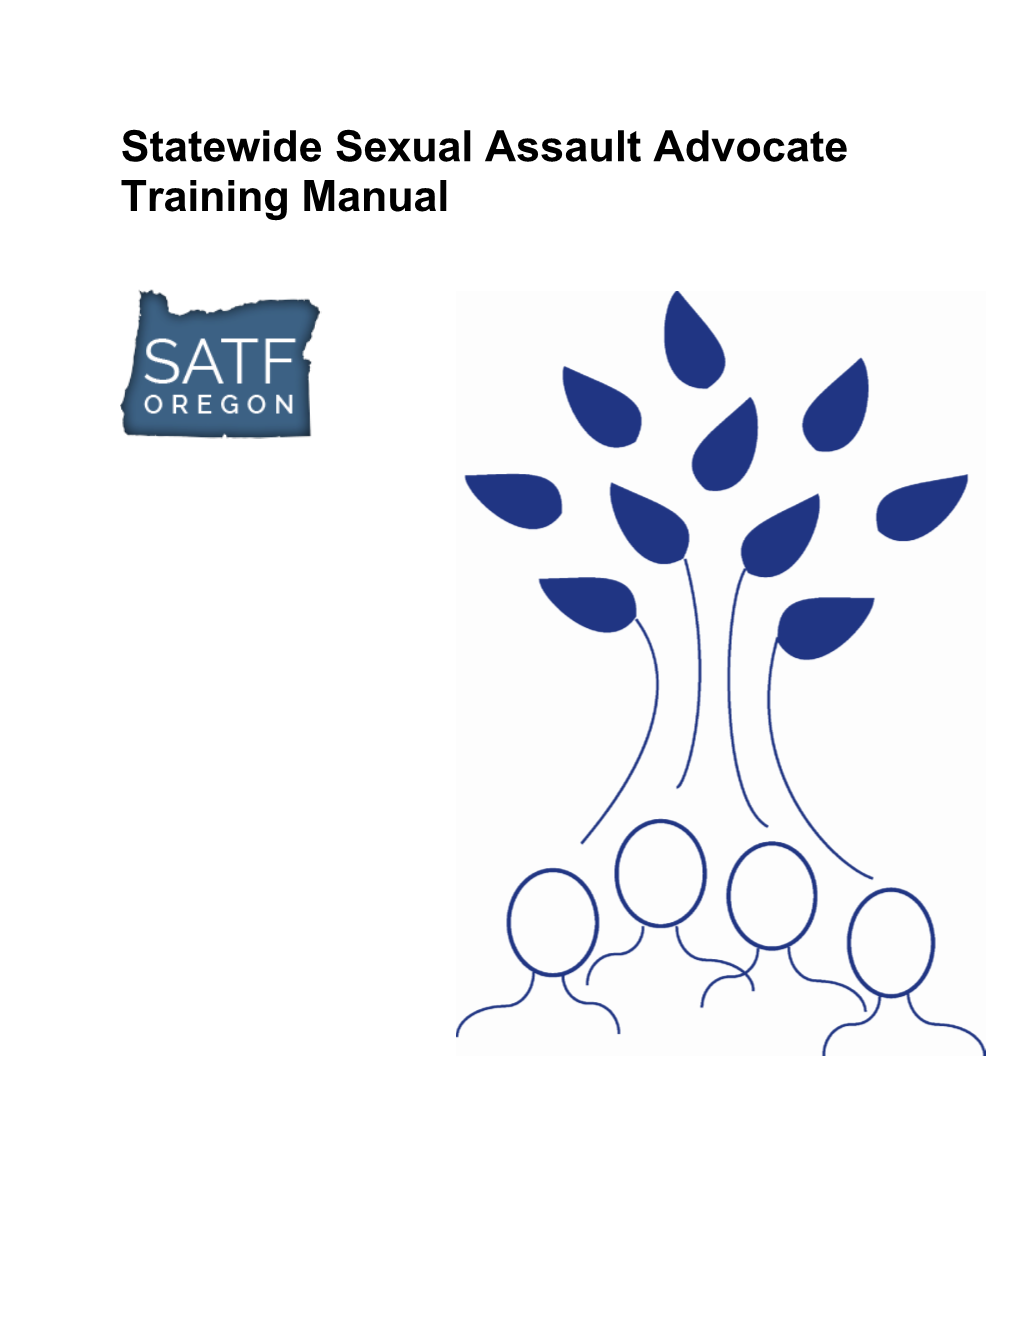 Statewide Sexual Assault Advocate Training Manual